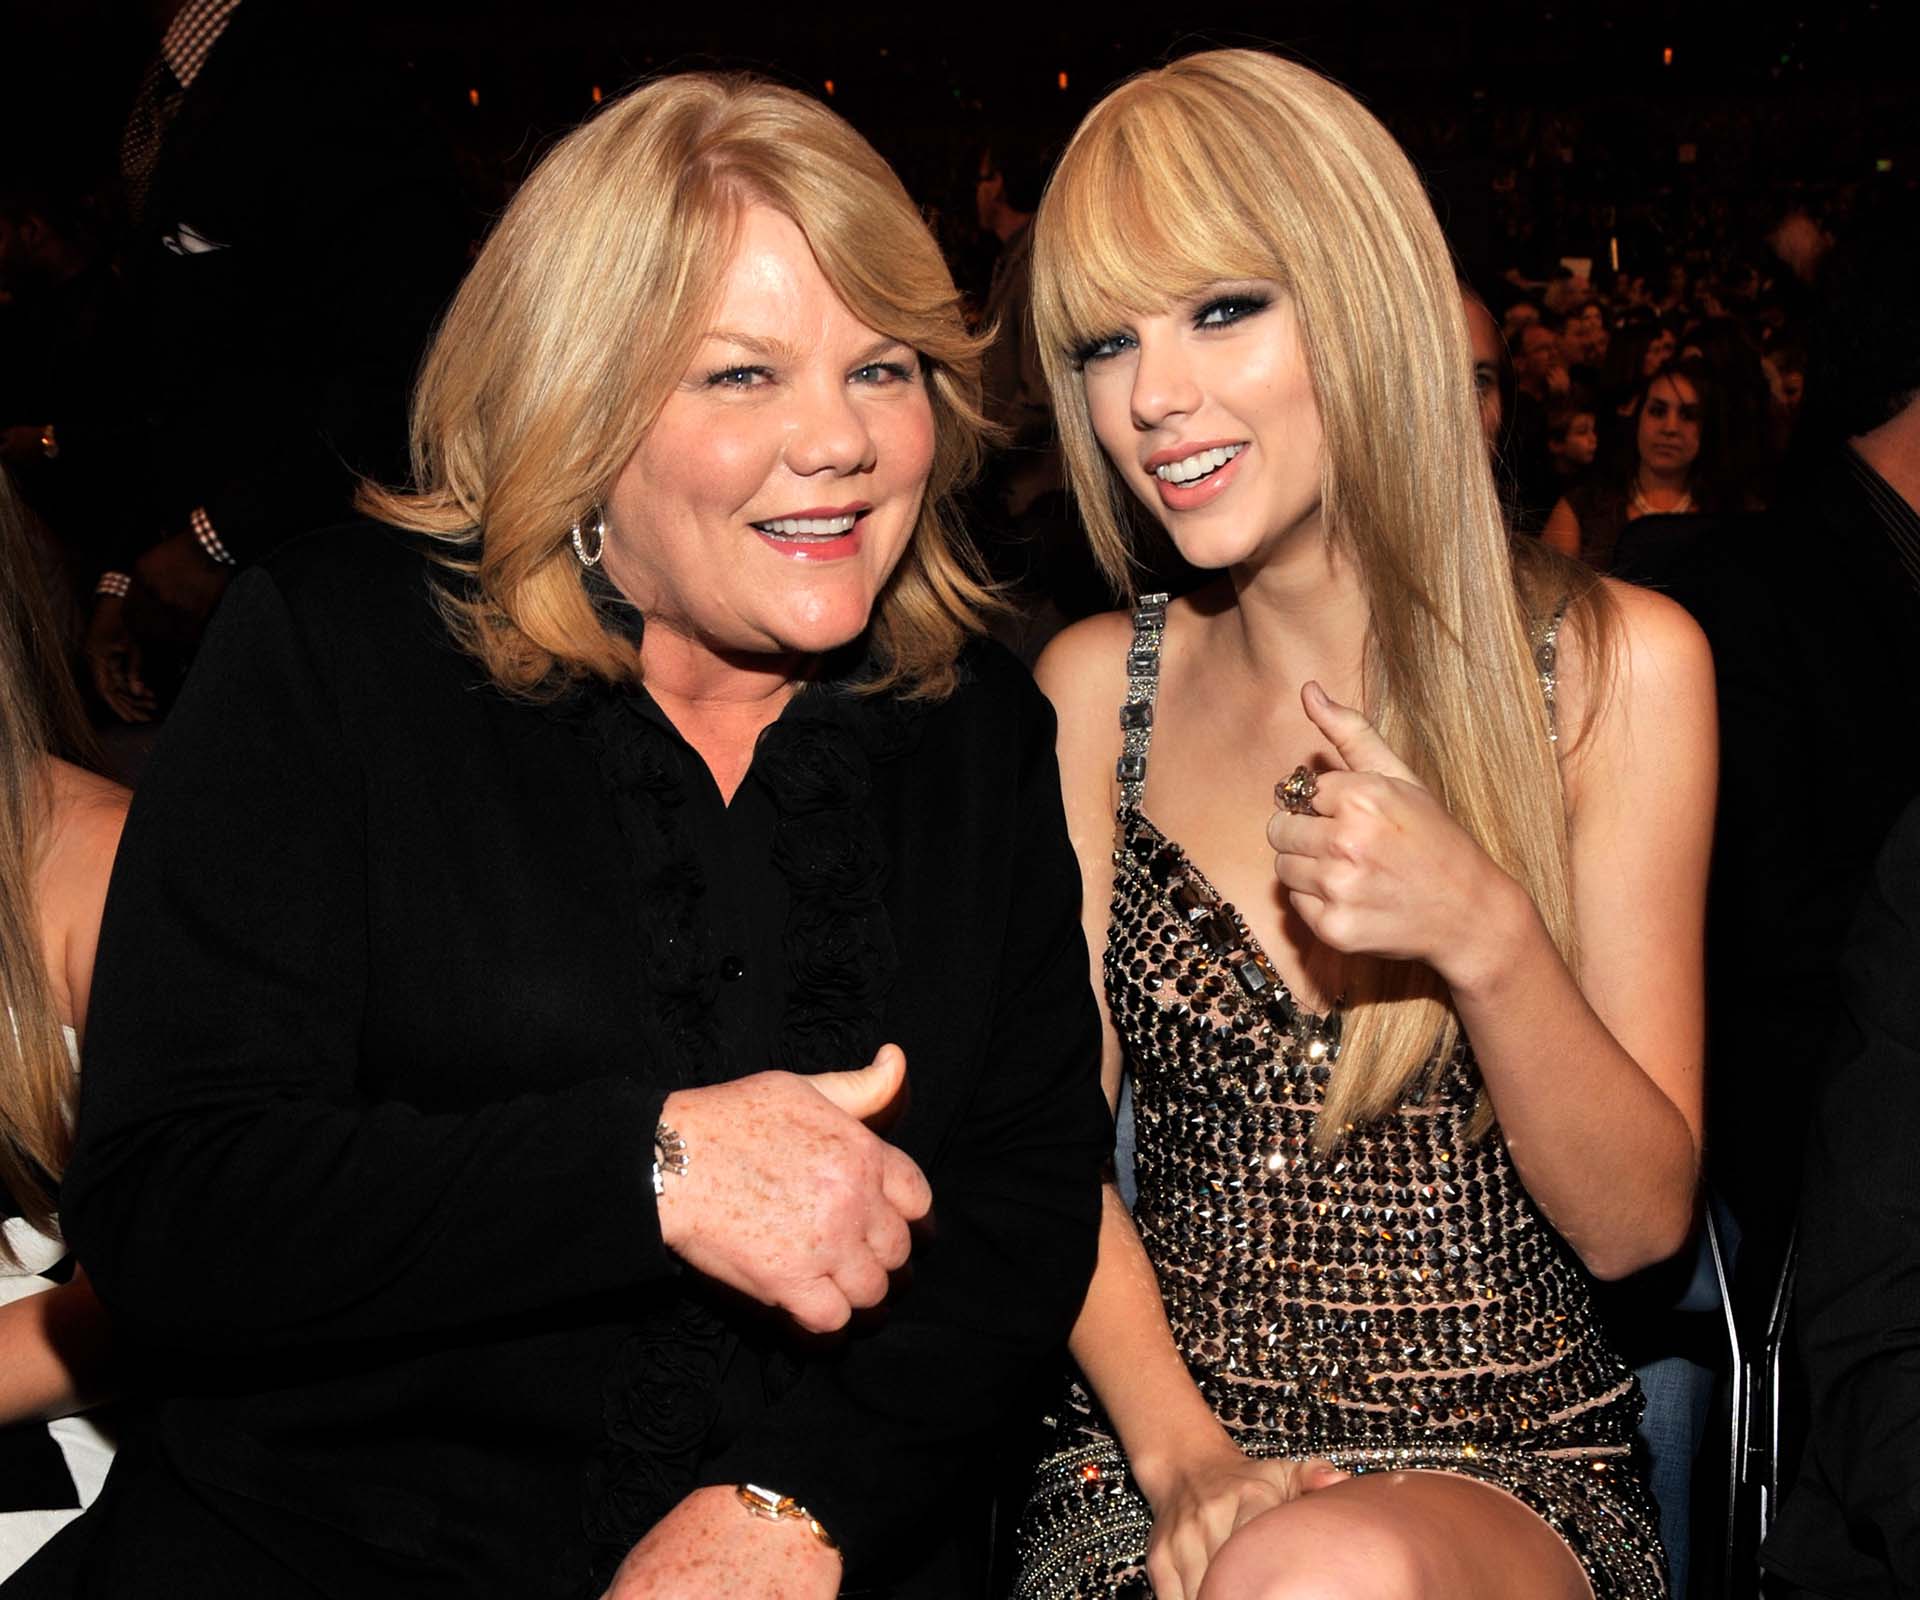 Taylor Swift and her mum, Andrea Swift